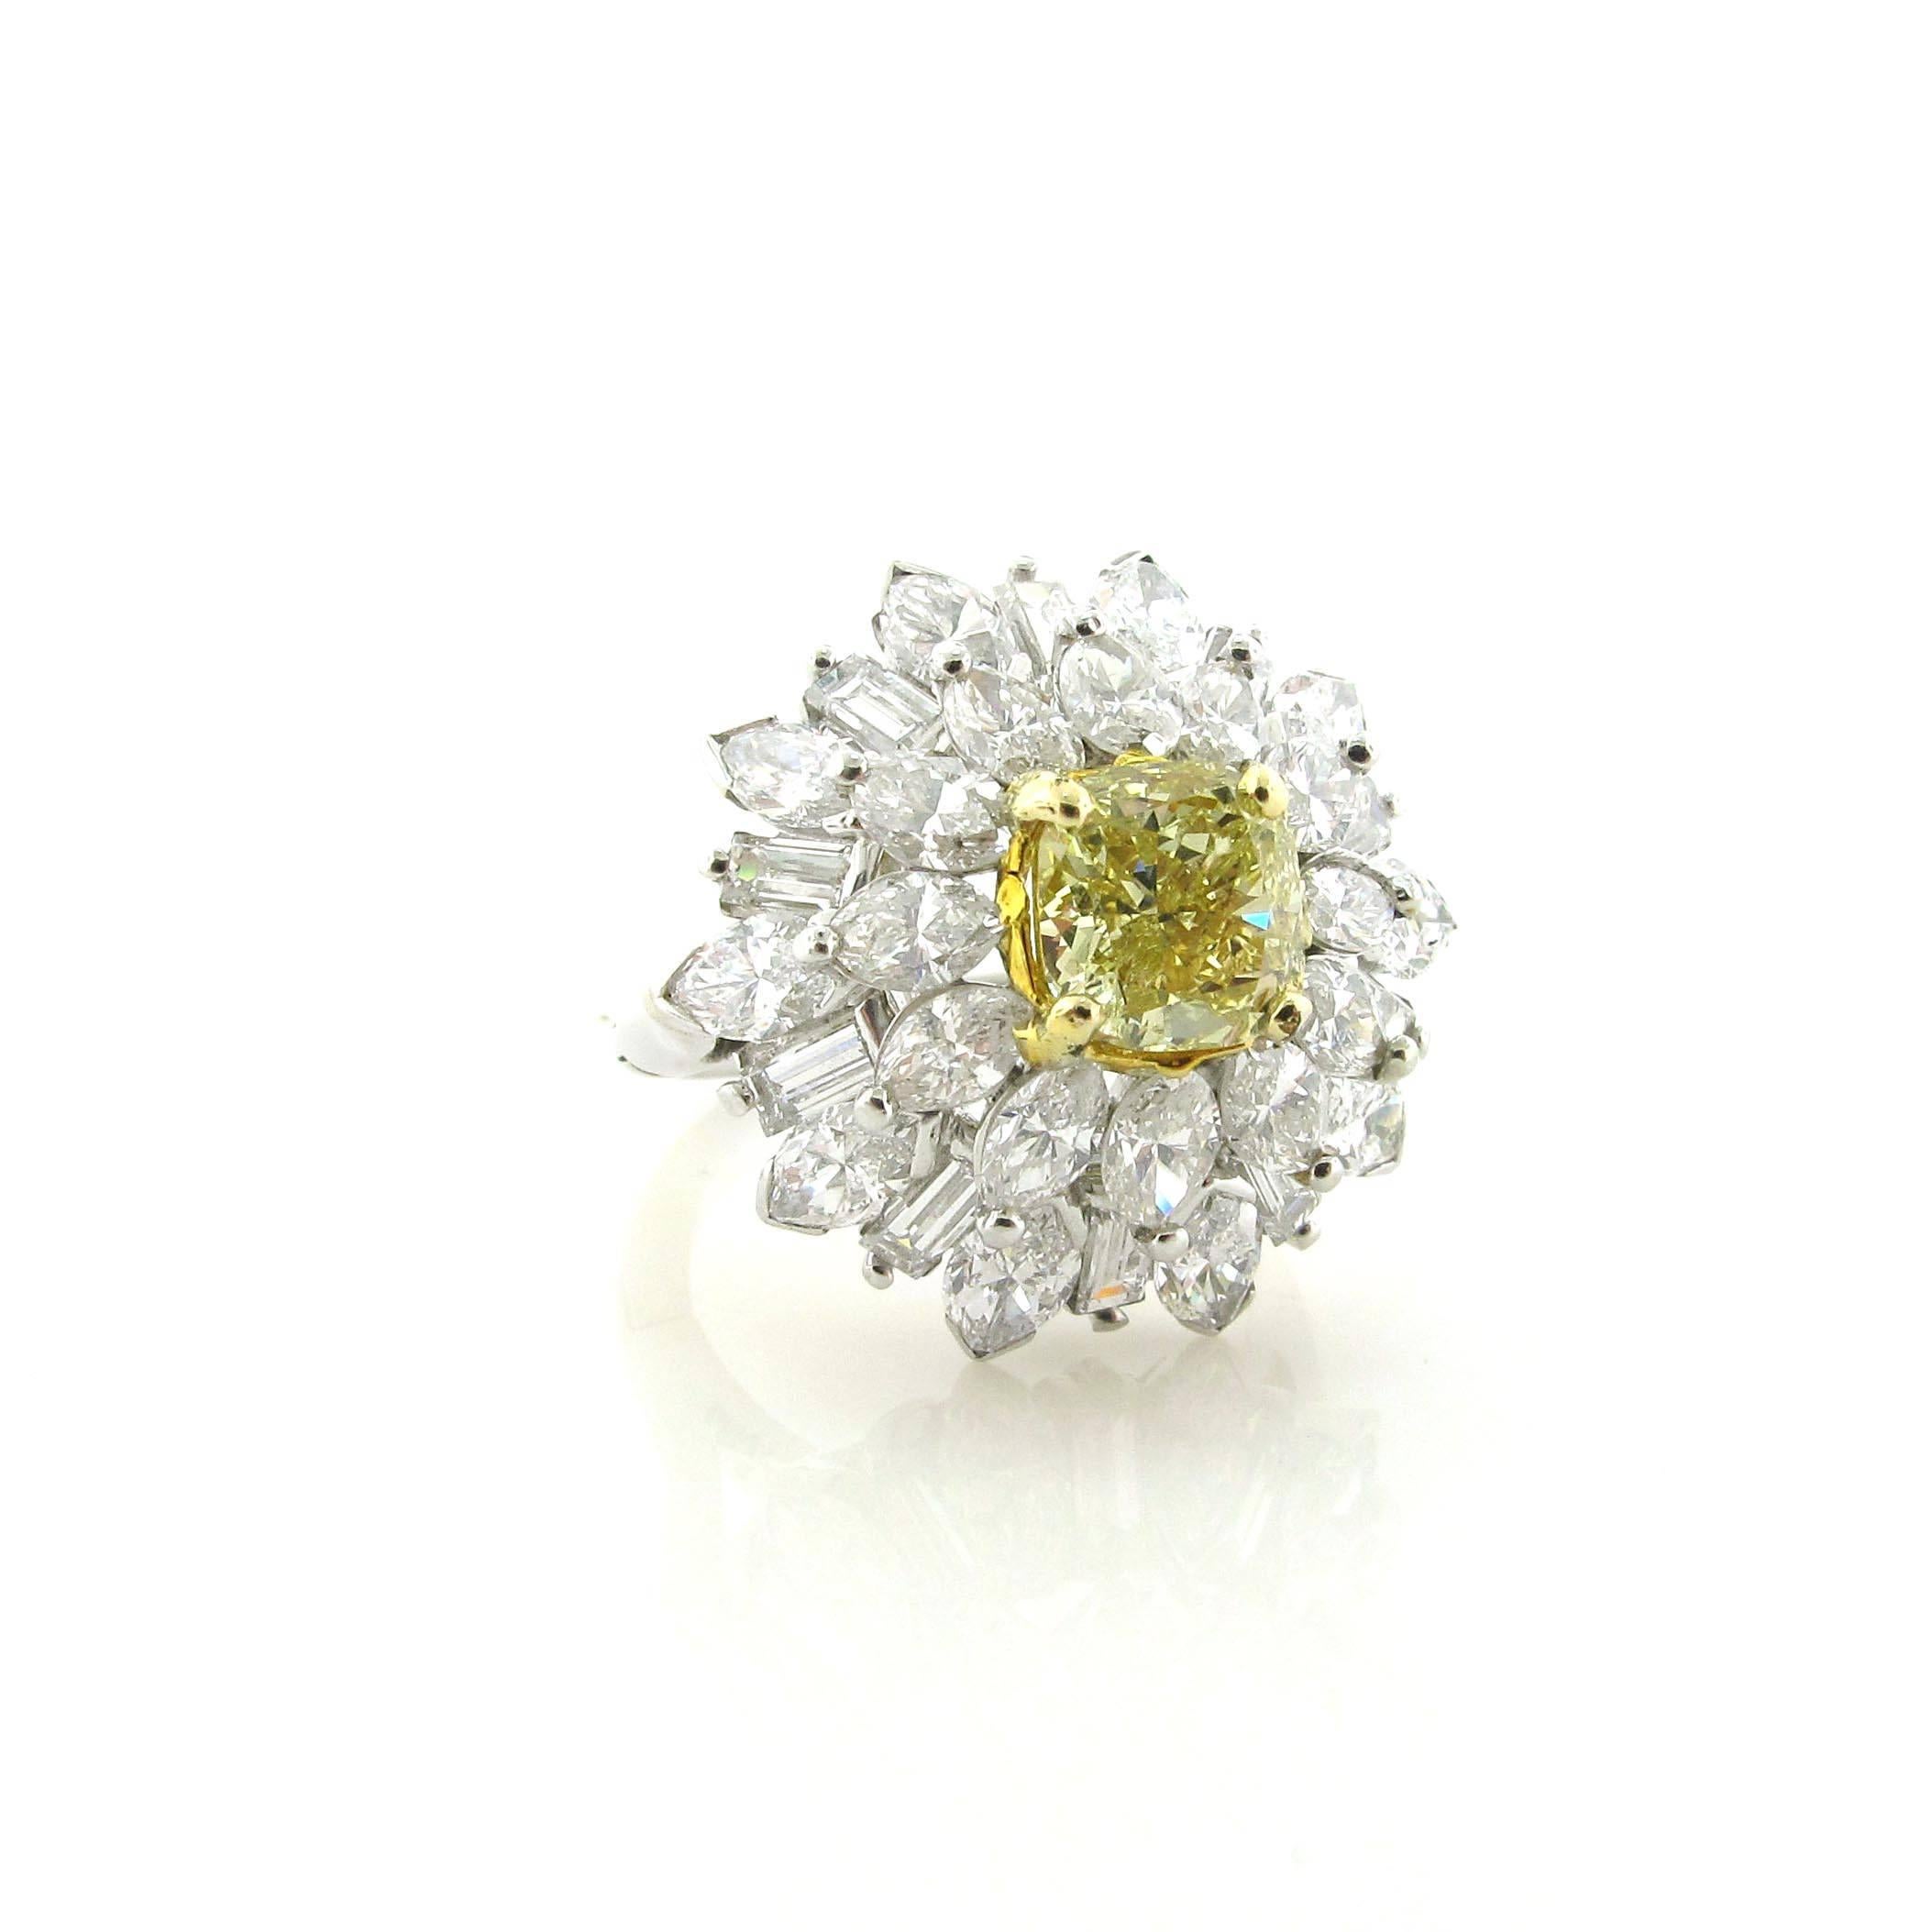 Gorgeous 1.64 carat Fancy Light Yellow Cushion diamond with GIA certificate. The center yellow diamond is surrounded by approximately 6 carats of fancy cut white diamonds. This ring will look great as either an everyday ring or dressed up for